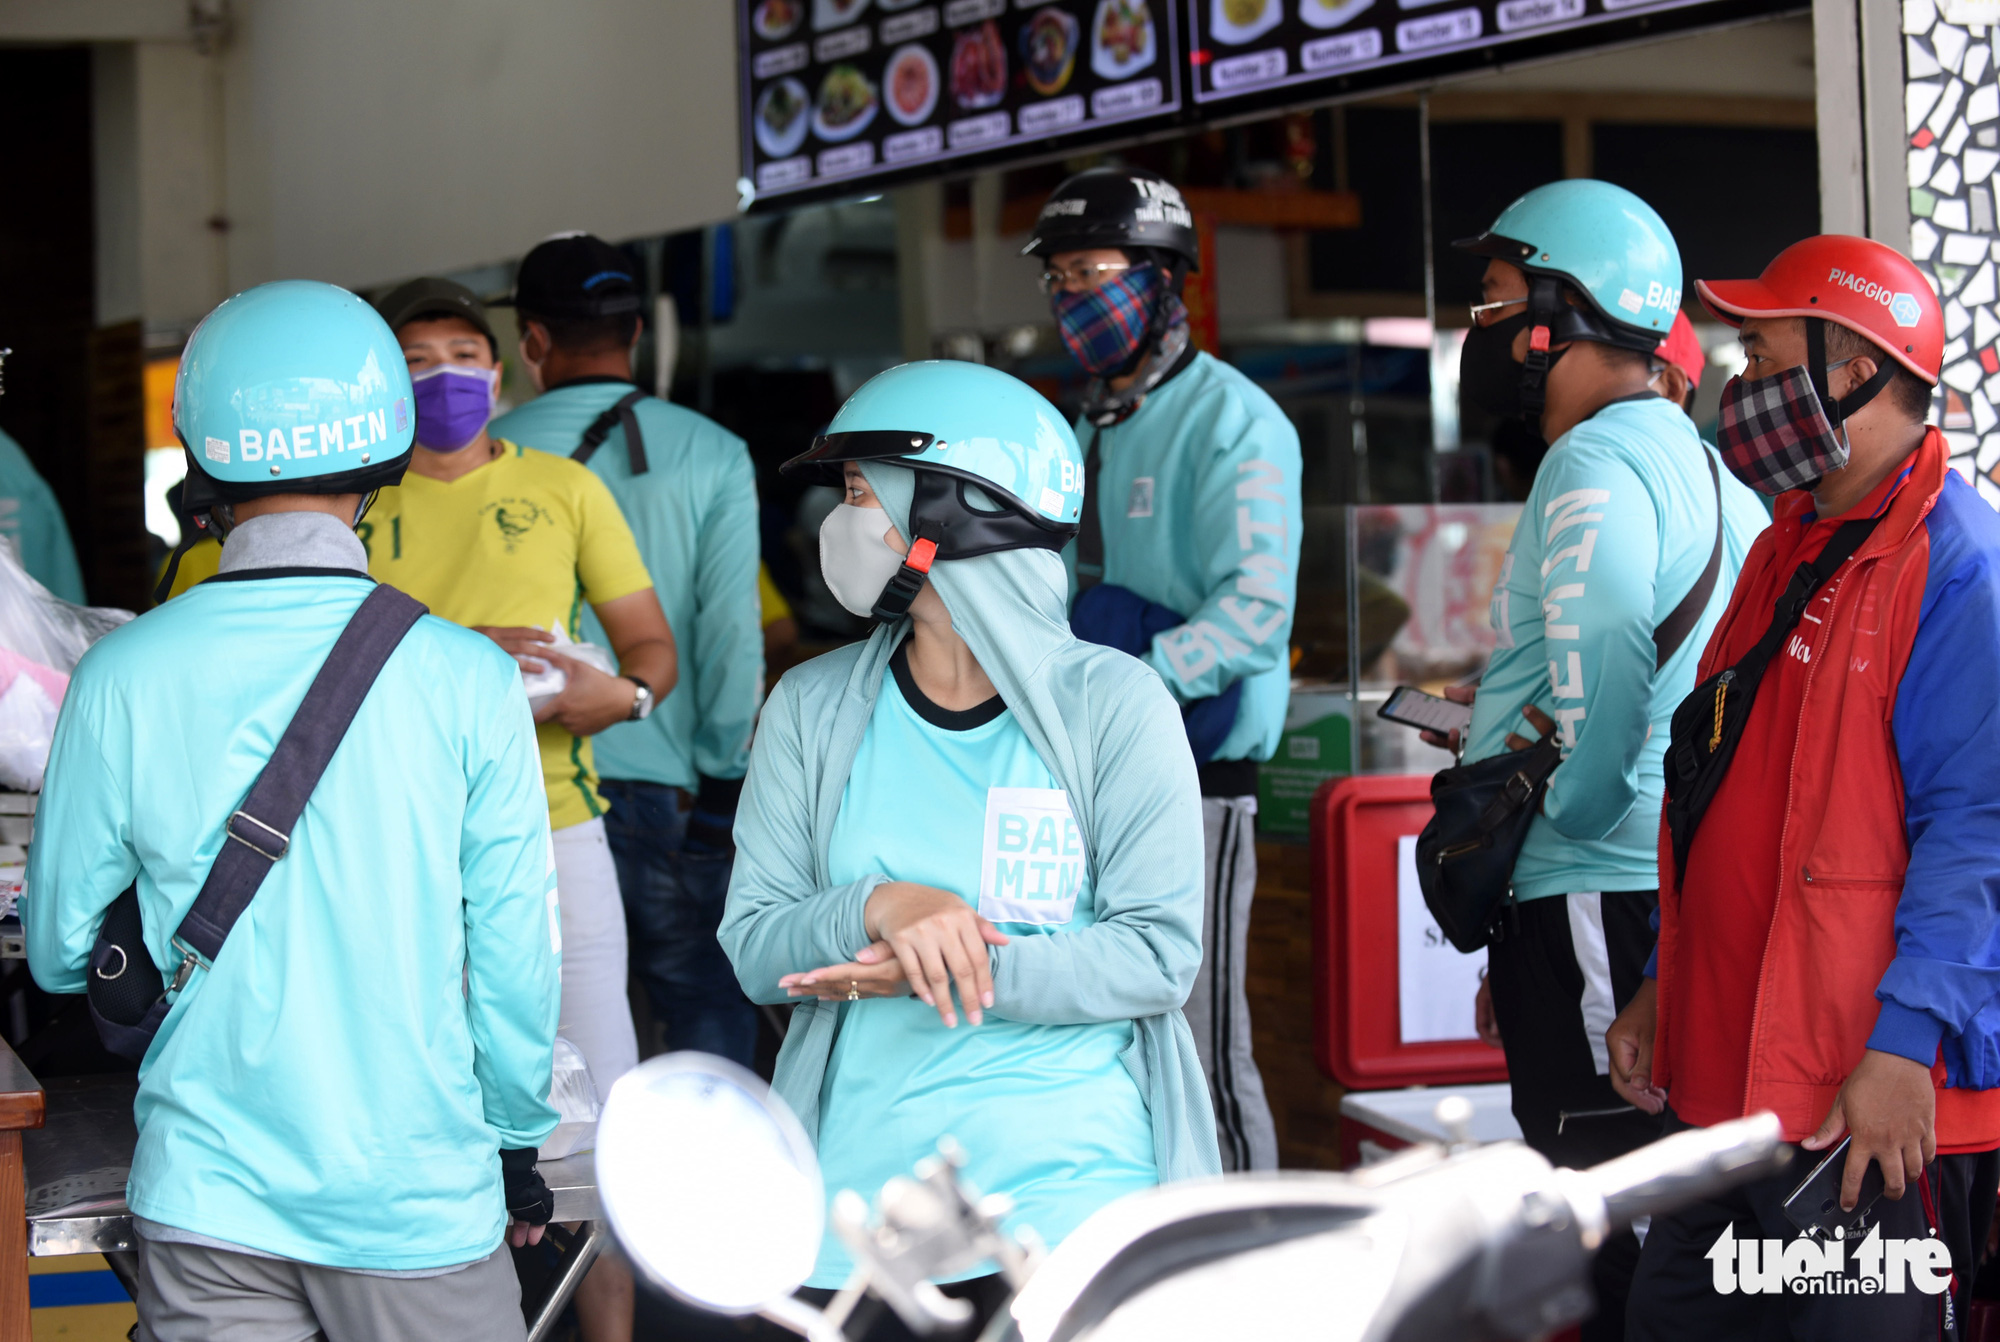 Delivery drivers wait for their orders to be prepared at a restaurant in Ho Chi Minh City, Vietnam. Photo: Duyen Phan / Tuoi Tre